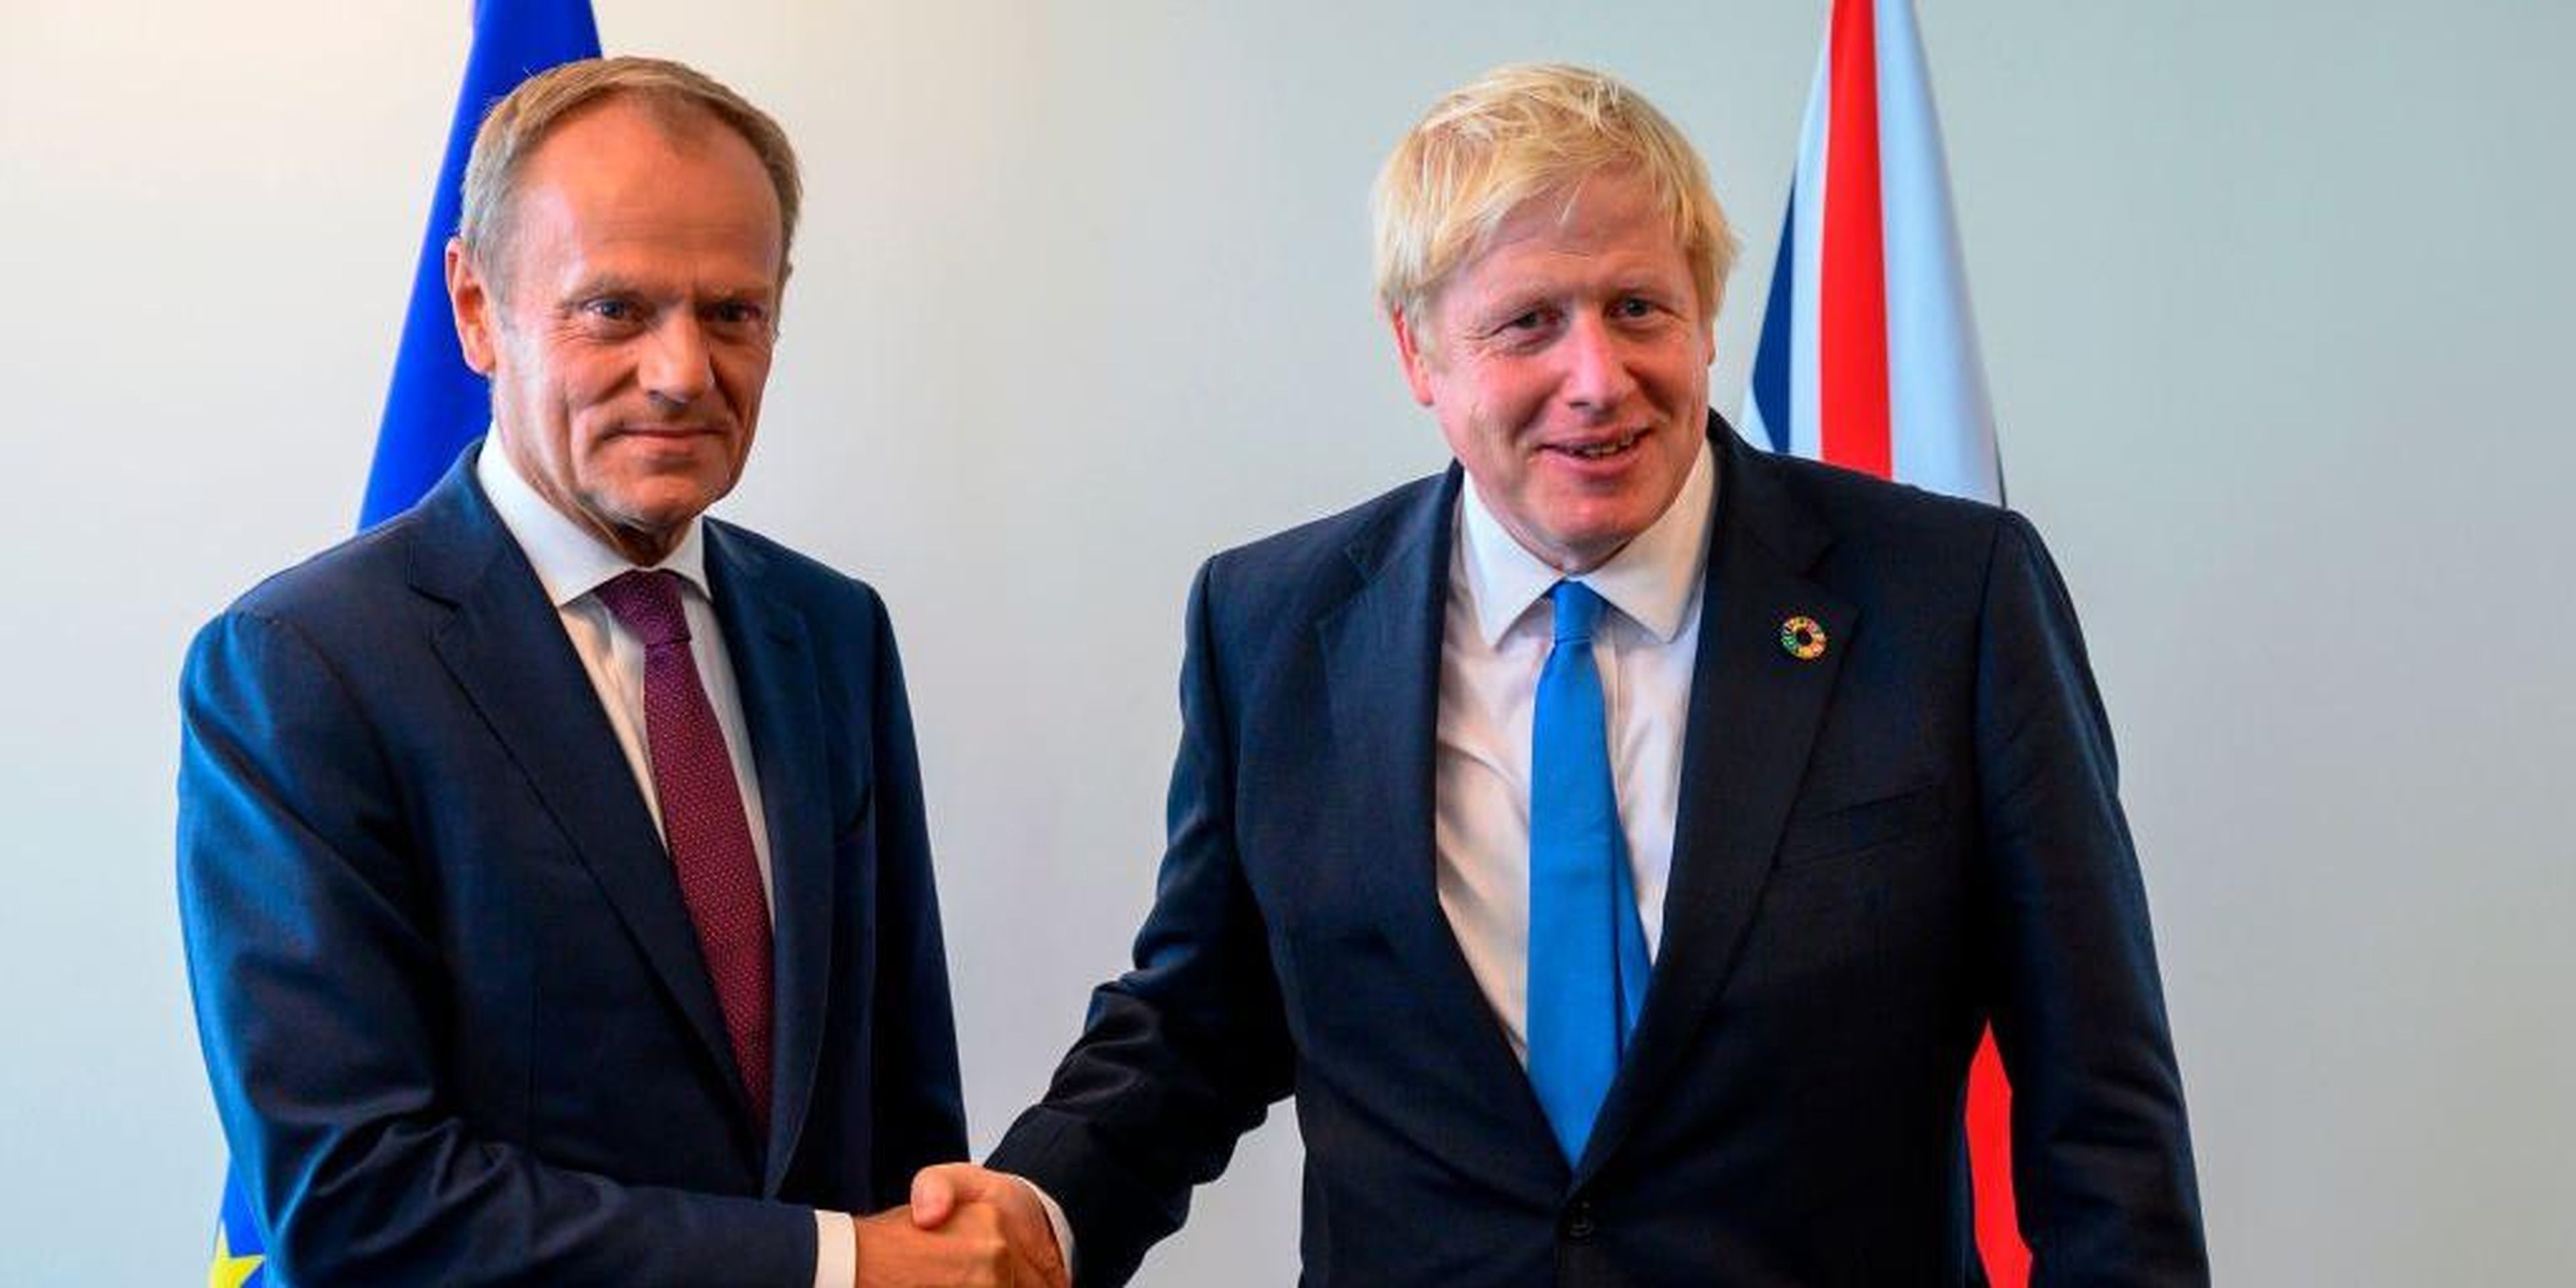 The EU accuses Boris Johnson of playing a ‘stupid blame game’ as the UK says a Brexit deal is now impossible